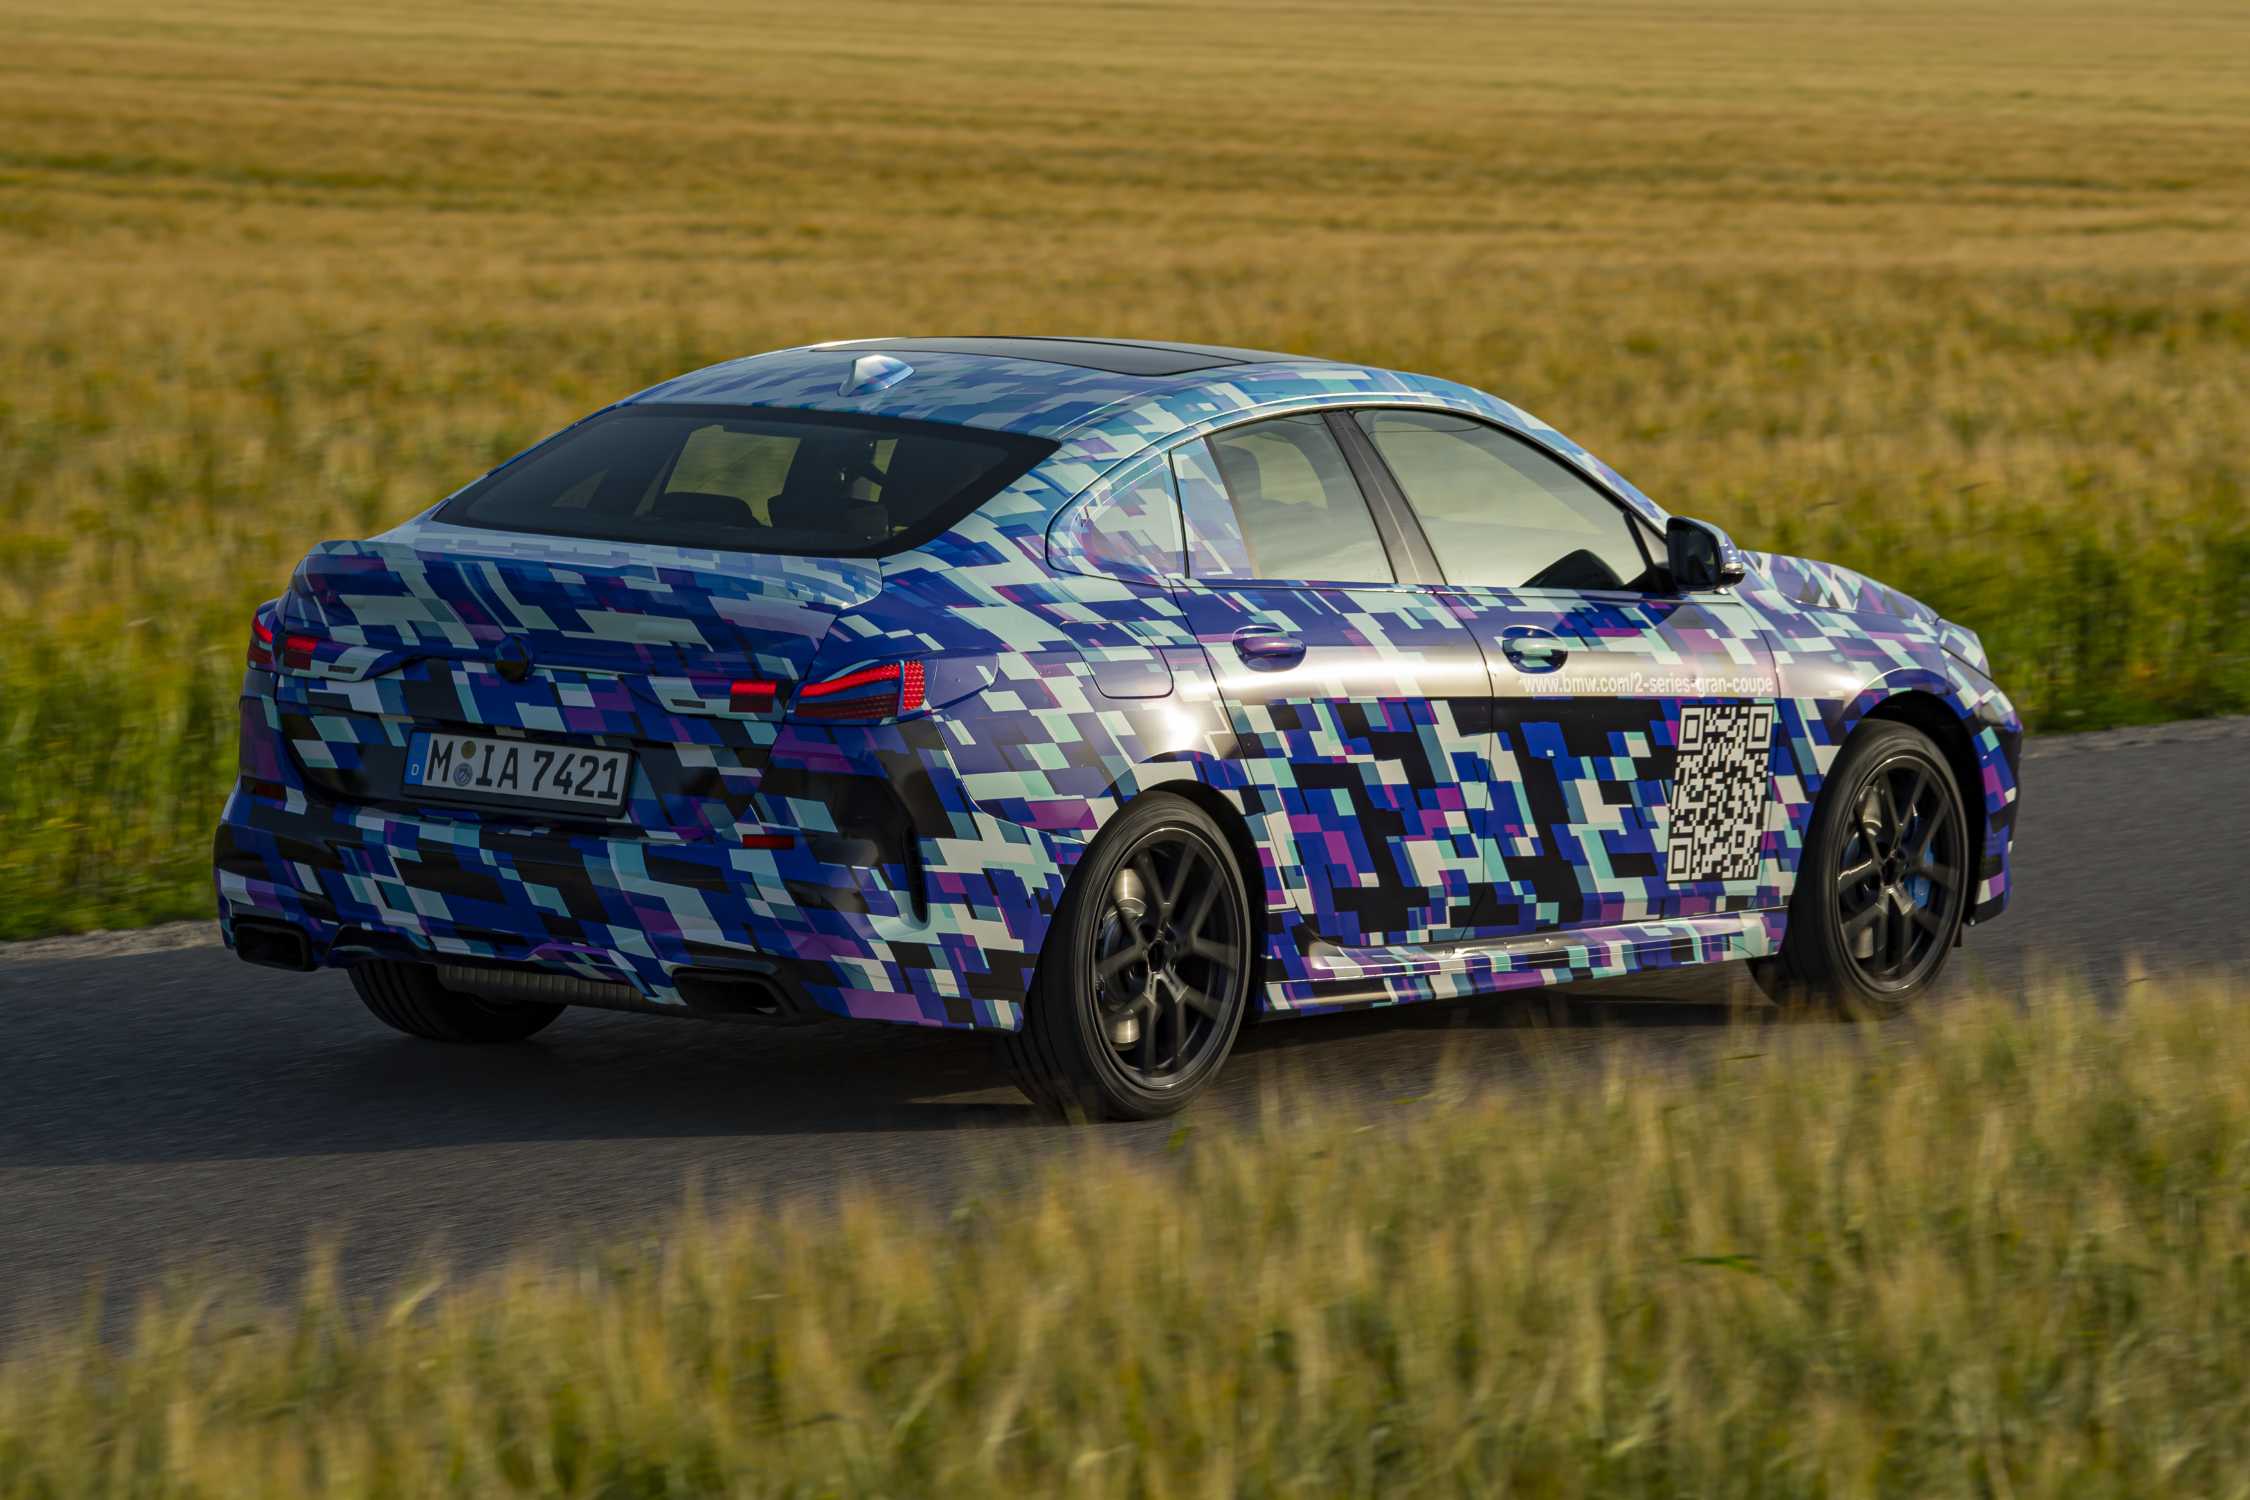 Testing in the north of Munich – The all-new BMW 2 Series Gran Coupé (07/2019).